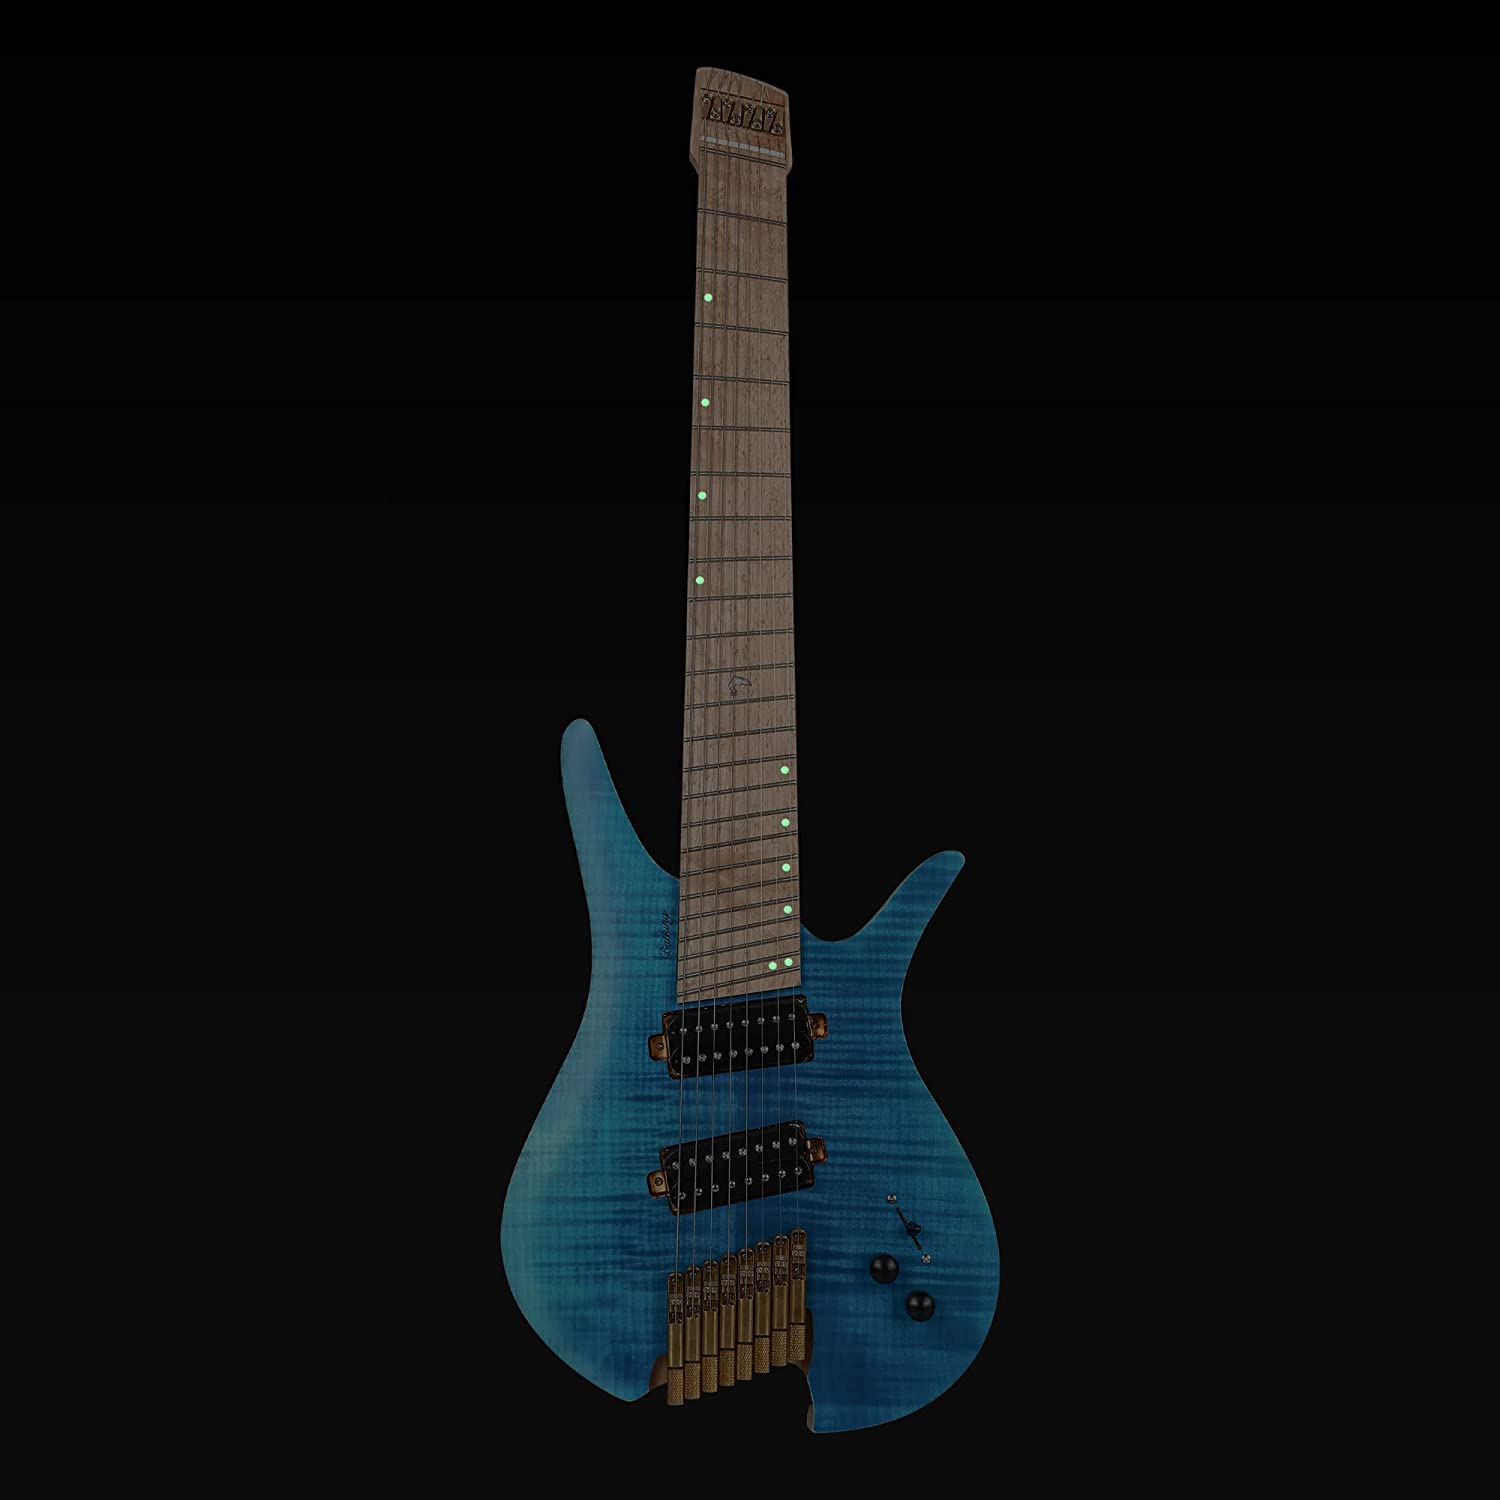 Batking 8 String Fanned Fret Headless Electric Travel Guitar with Multiscale Birdeyes Fingerboard Of Luminous Inlay(HF12)